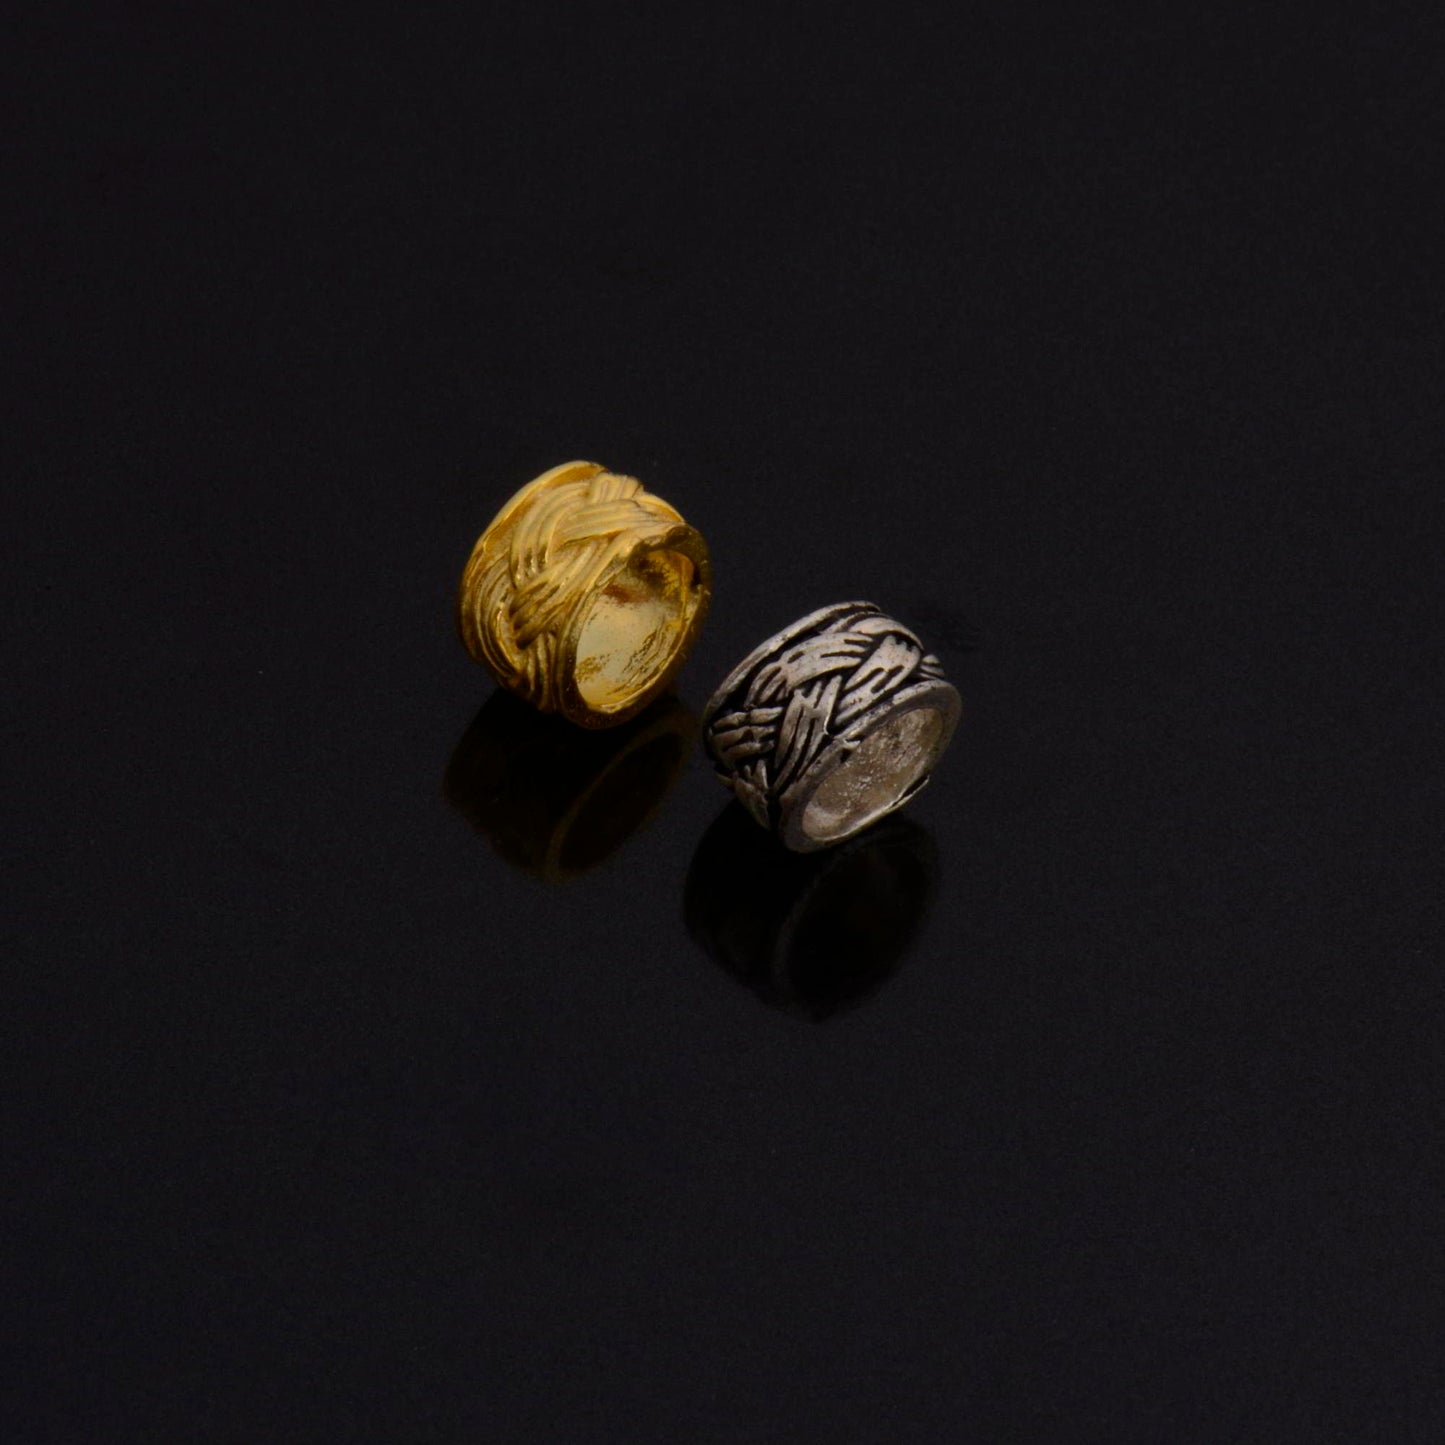 24K Gold Vermeil Large Hole Bead Rings, Silver Hole Beads Rings, 24K Gold Plated Bead Rings, Jewelry Making Findings, M / VM137